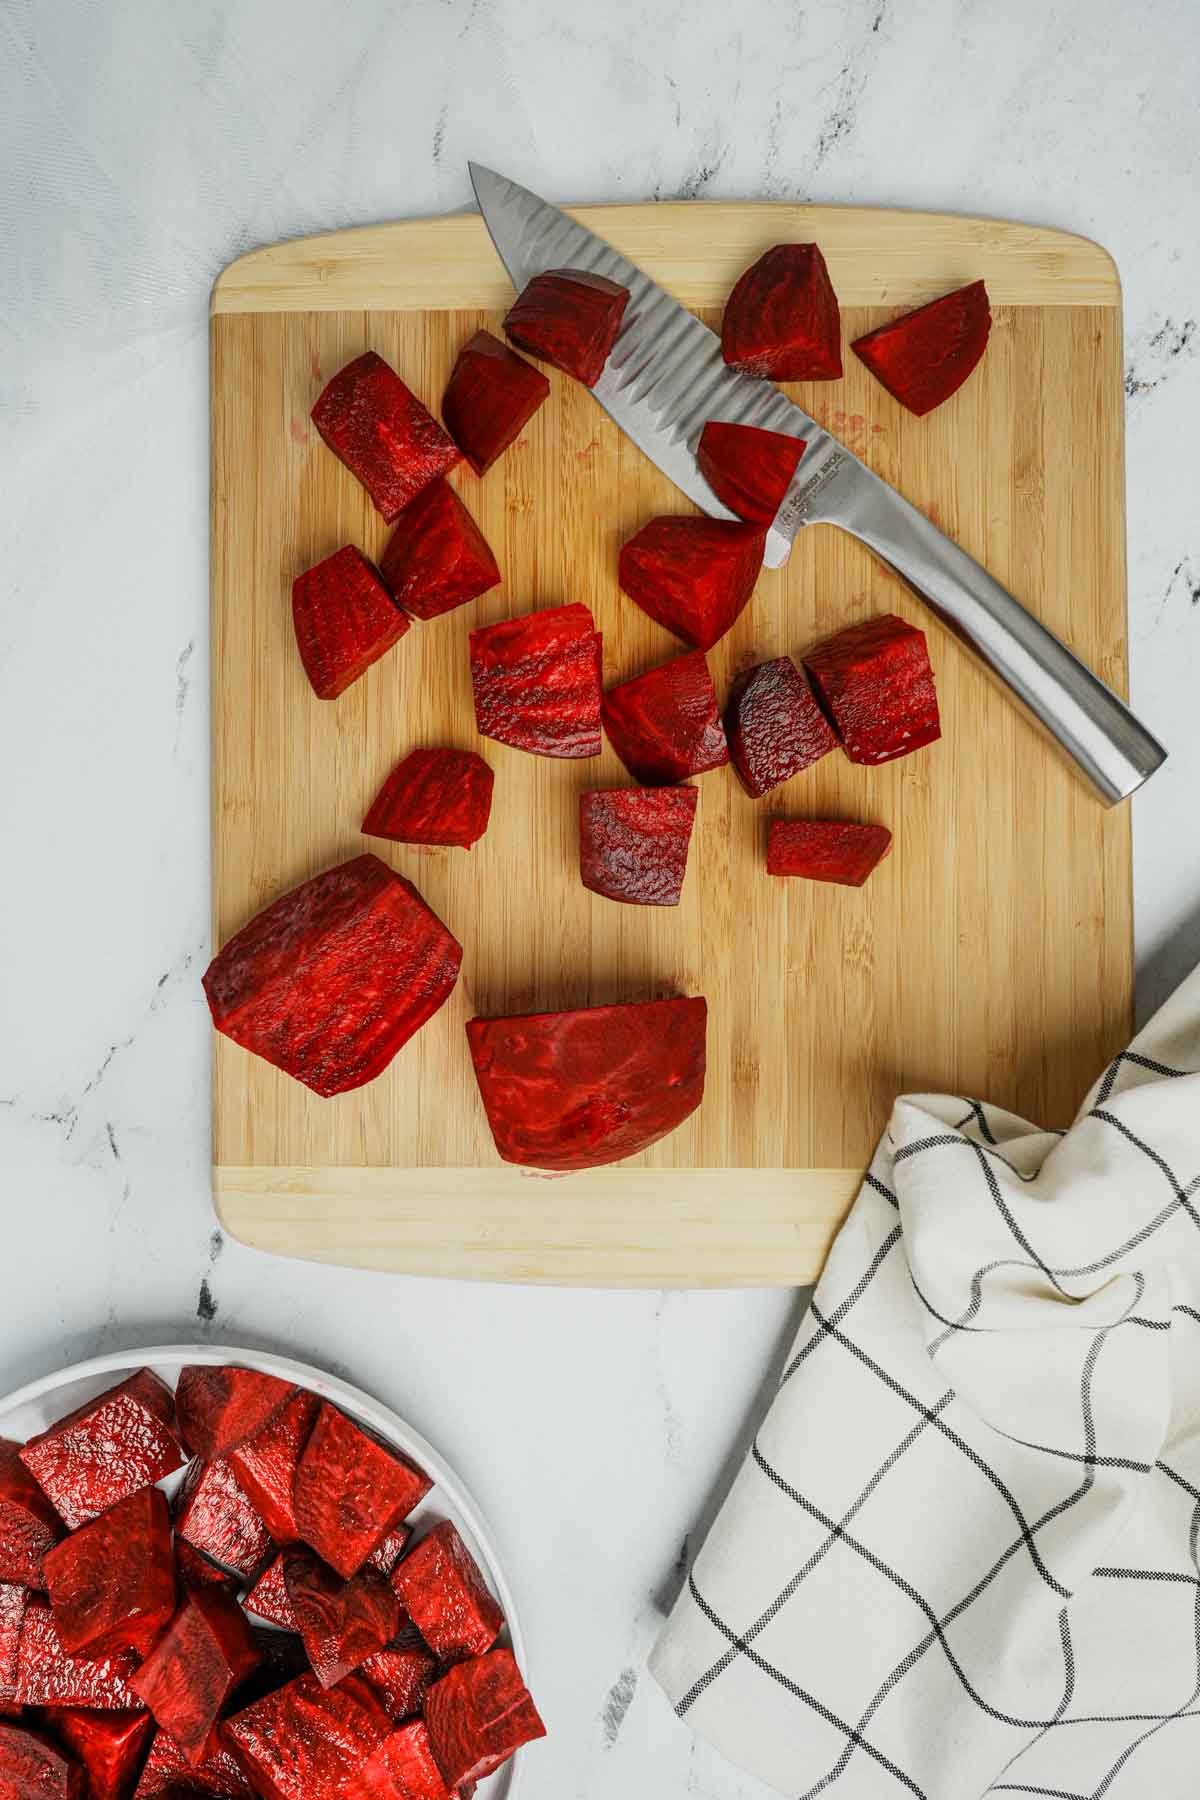 beets being cut on a board